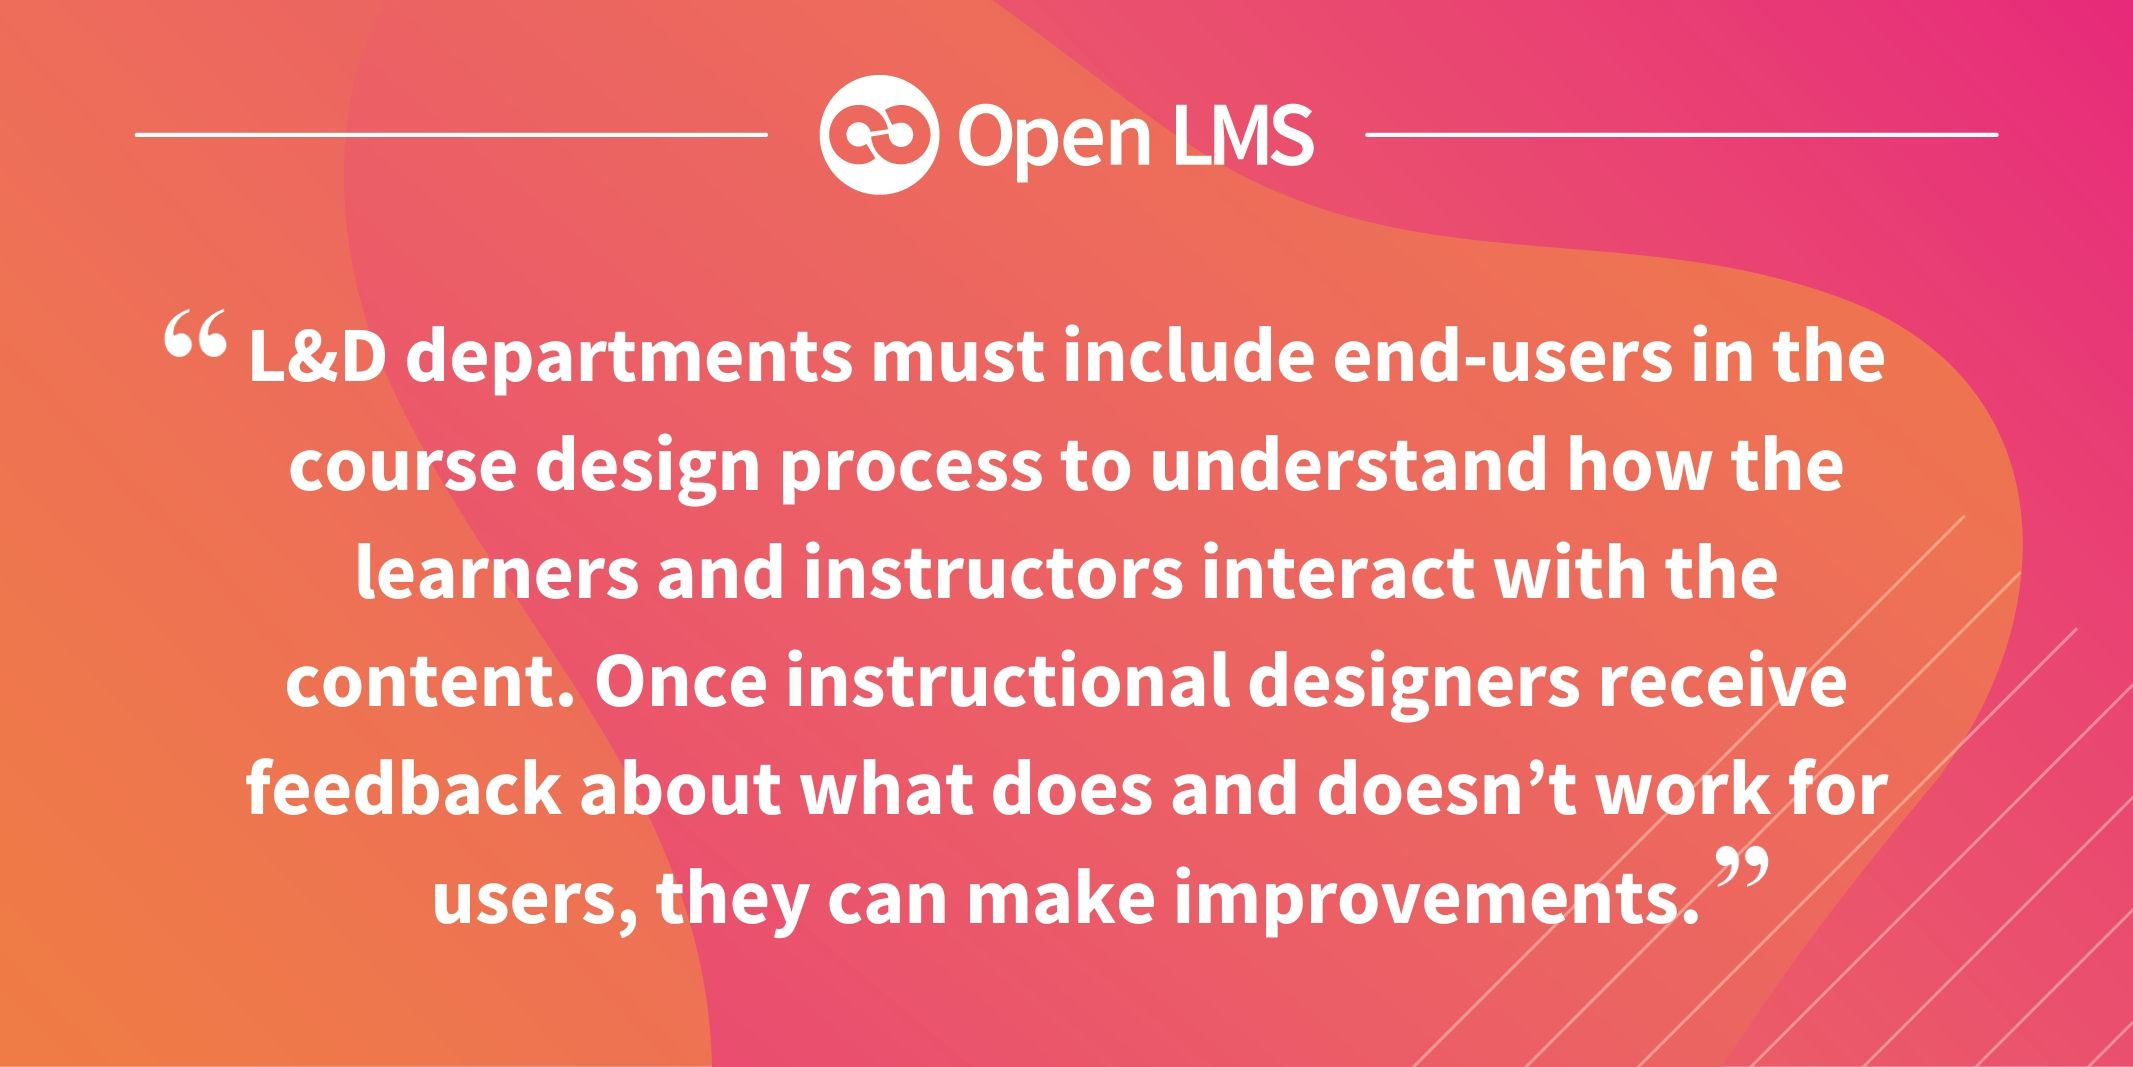 L&D departments must include end-users in the course design process to understand how the learners and instructors interact with the content. Once instructional designers receive feedback about what does and doesn’t work for users, they can make improvements